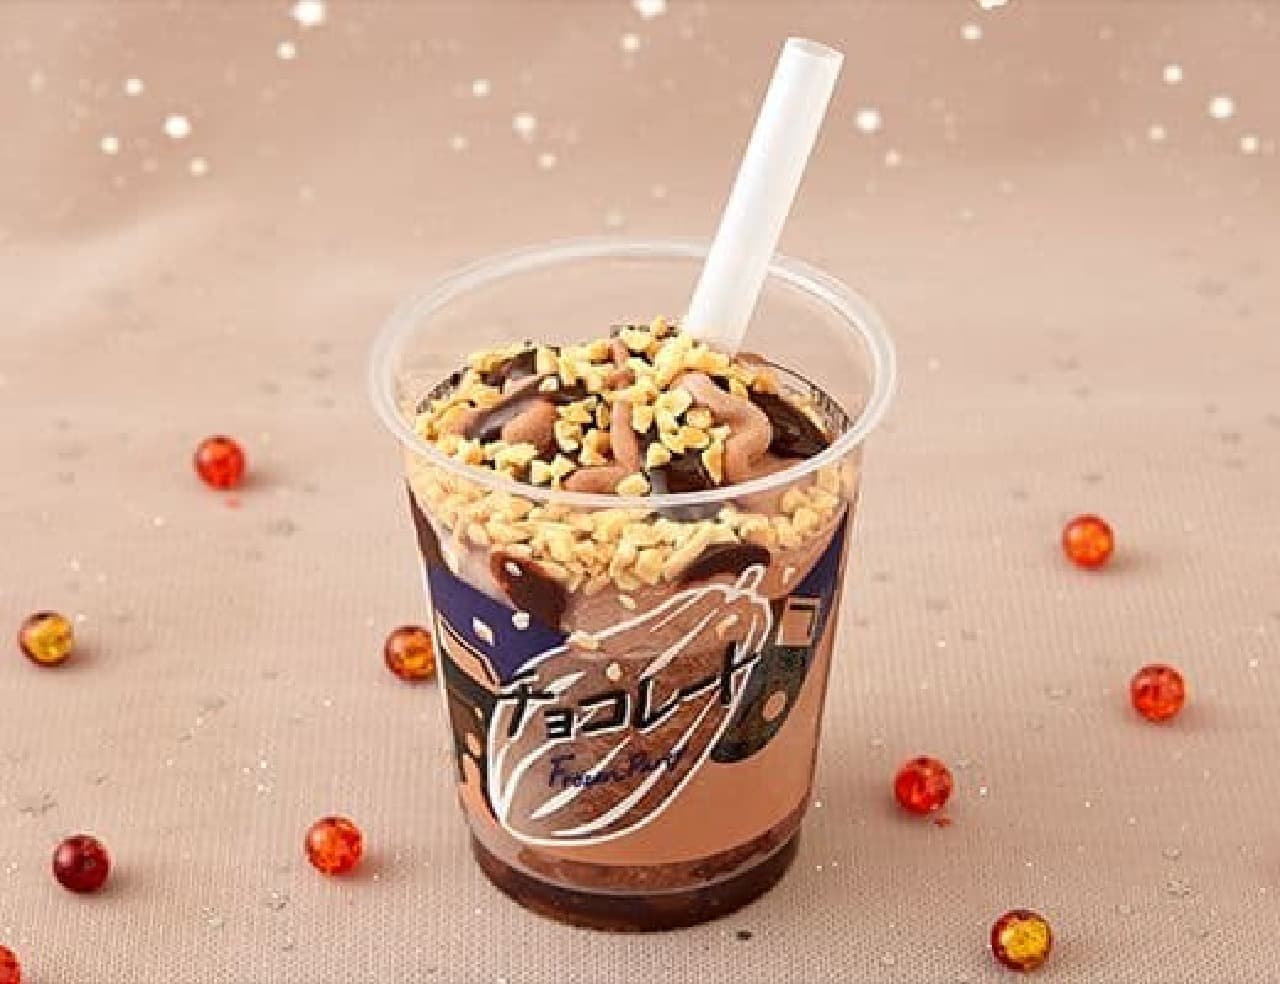 LAWSON "Frozen Party Chocolate 244g